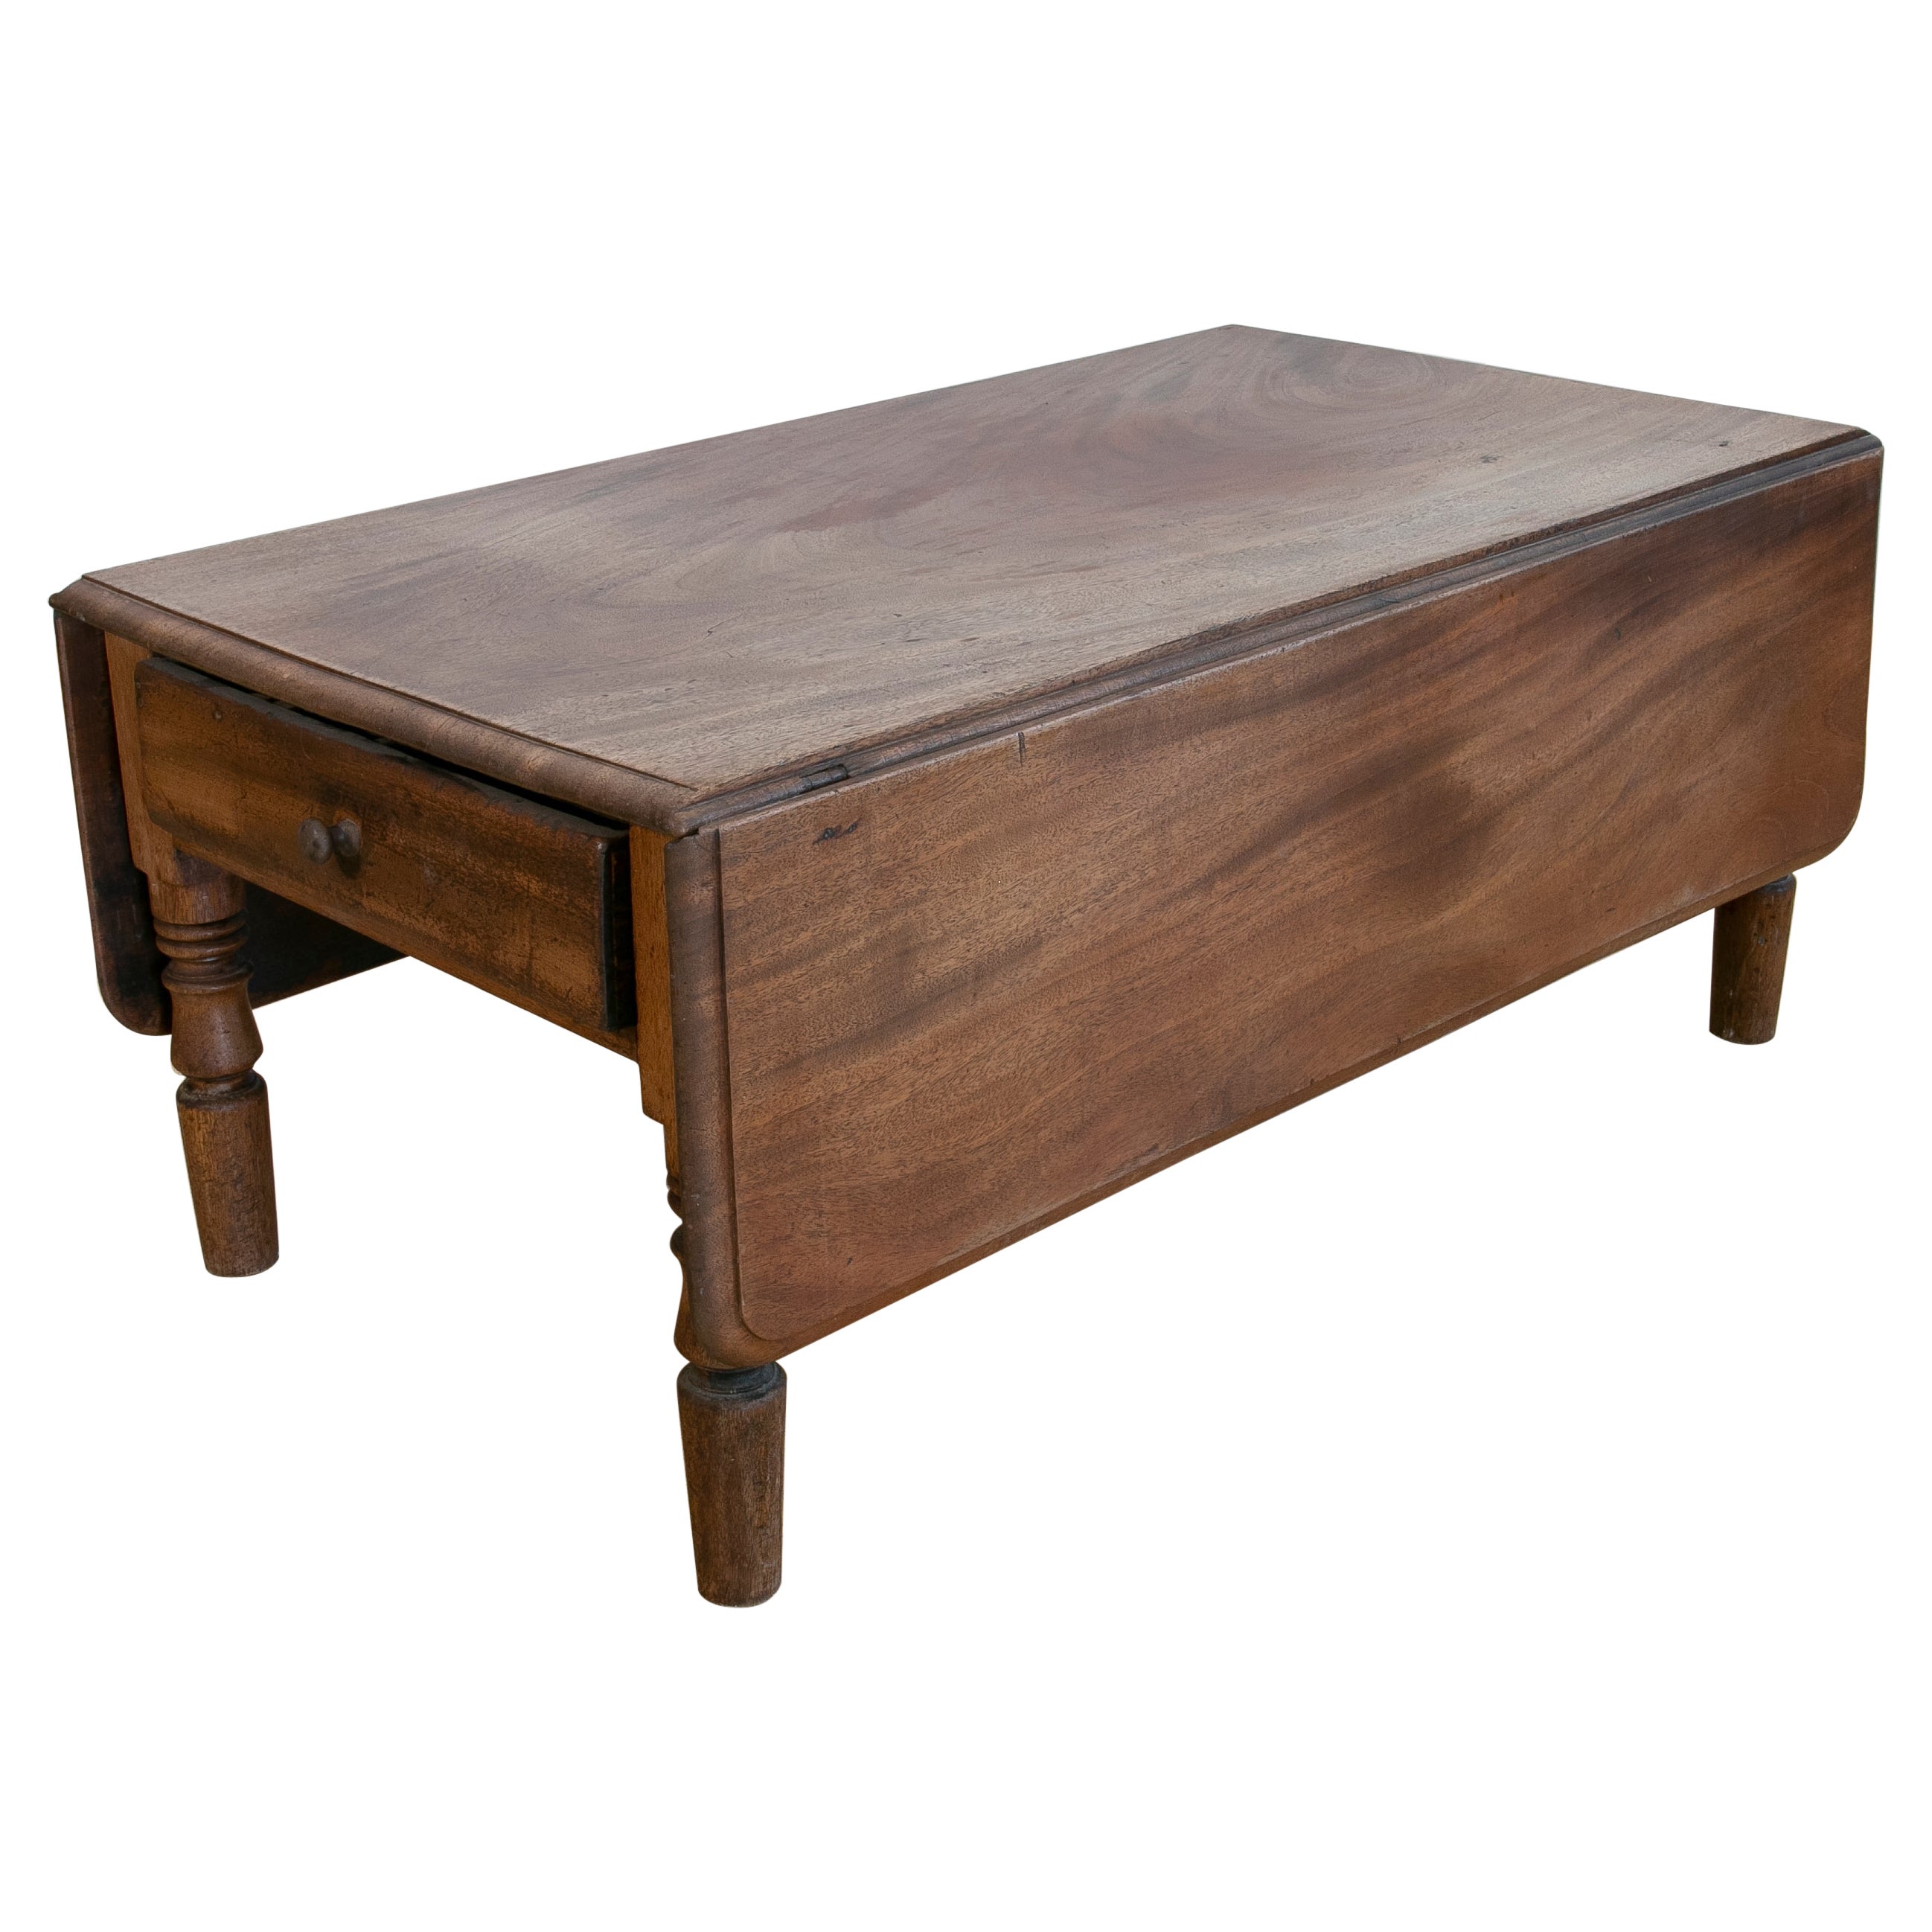 Wooden Coffee Wing Table with Drawers on the Side